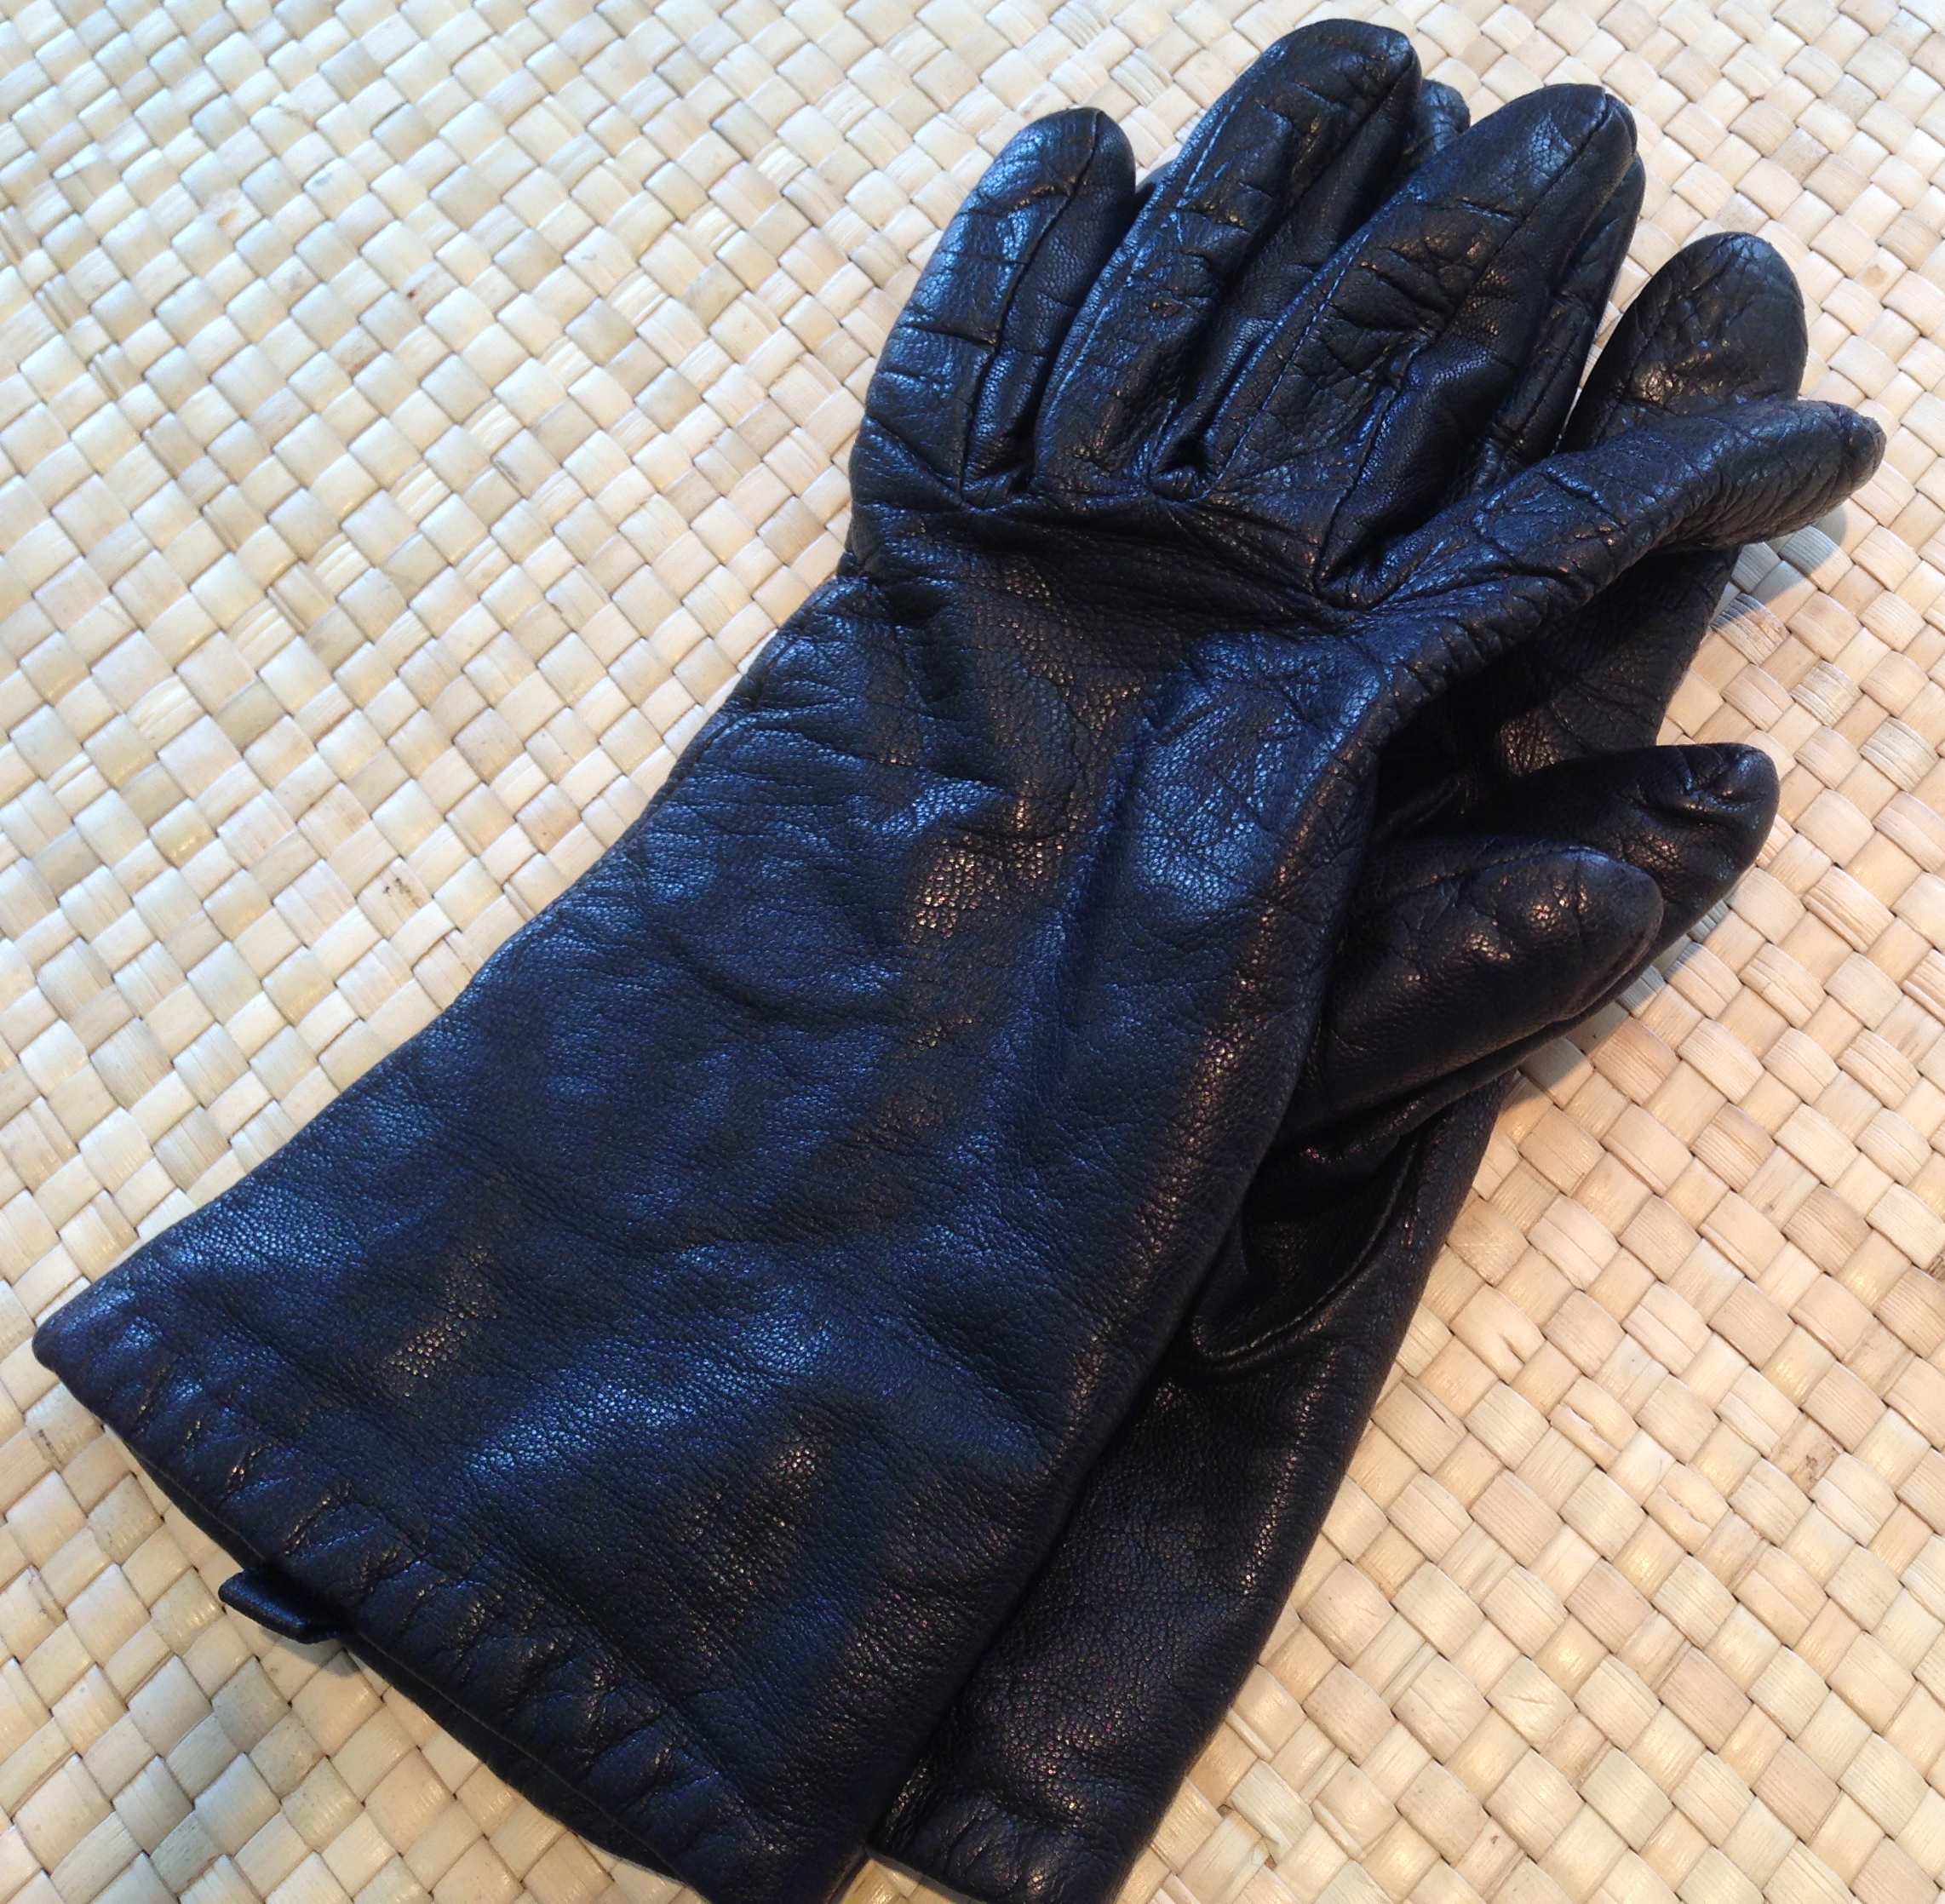 black leather gloves | todayigaveaway